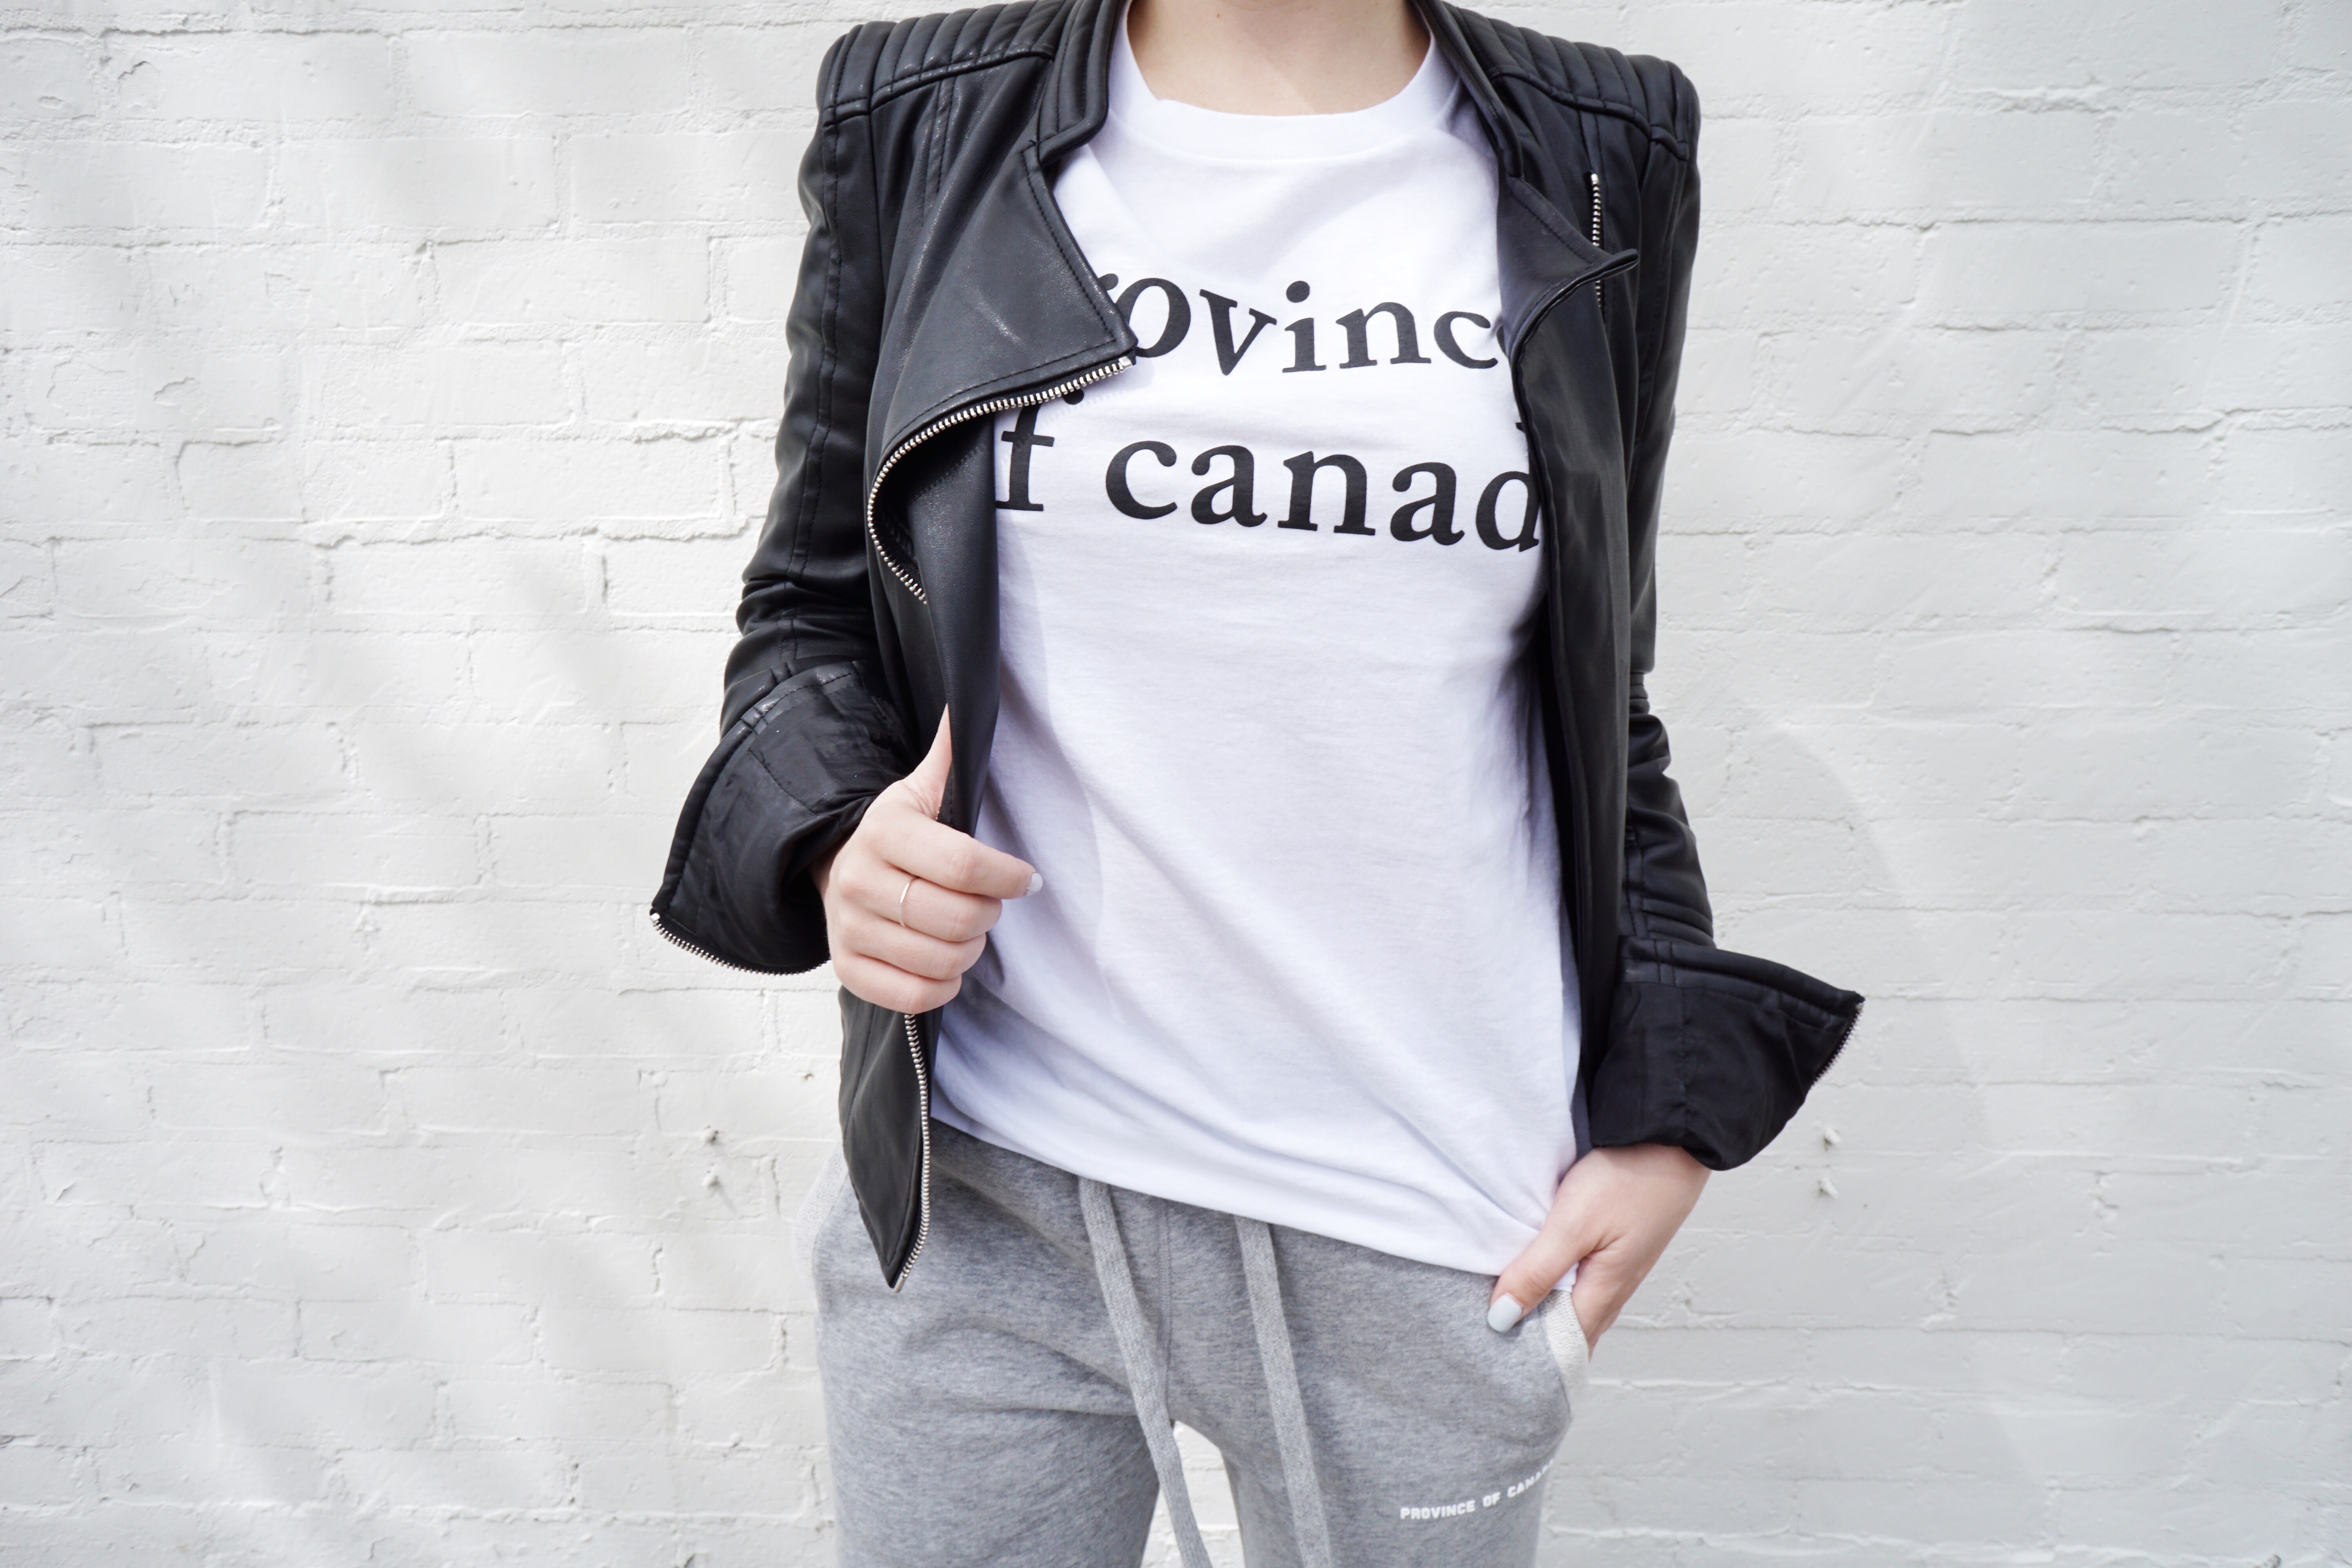 Drea Marie shares a clothing line that she is swooning over; Province of Canada. This Canadian made brand is well made and trendy. PERFECT.